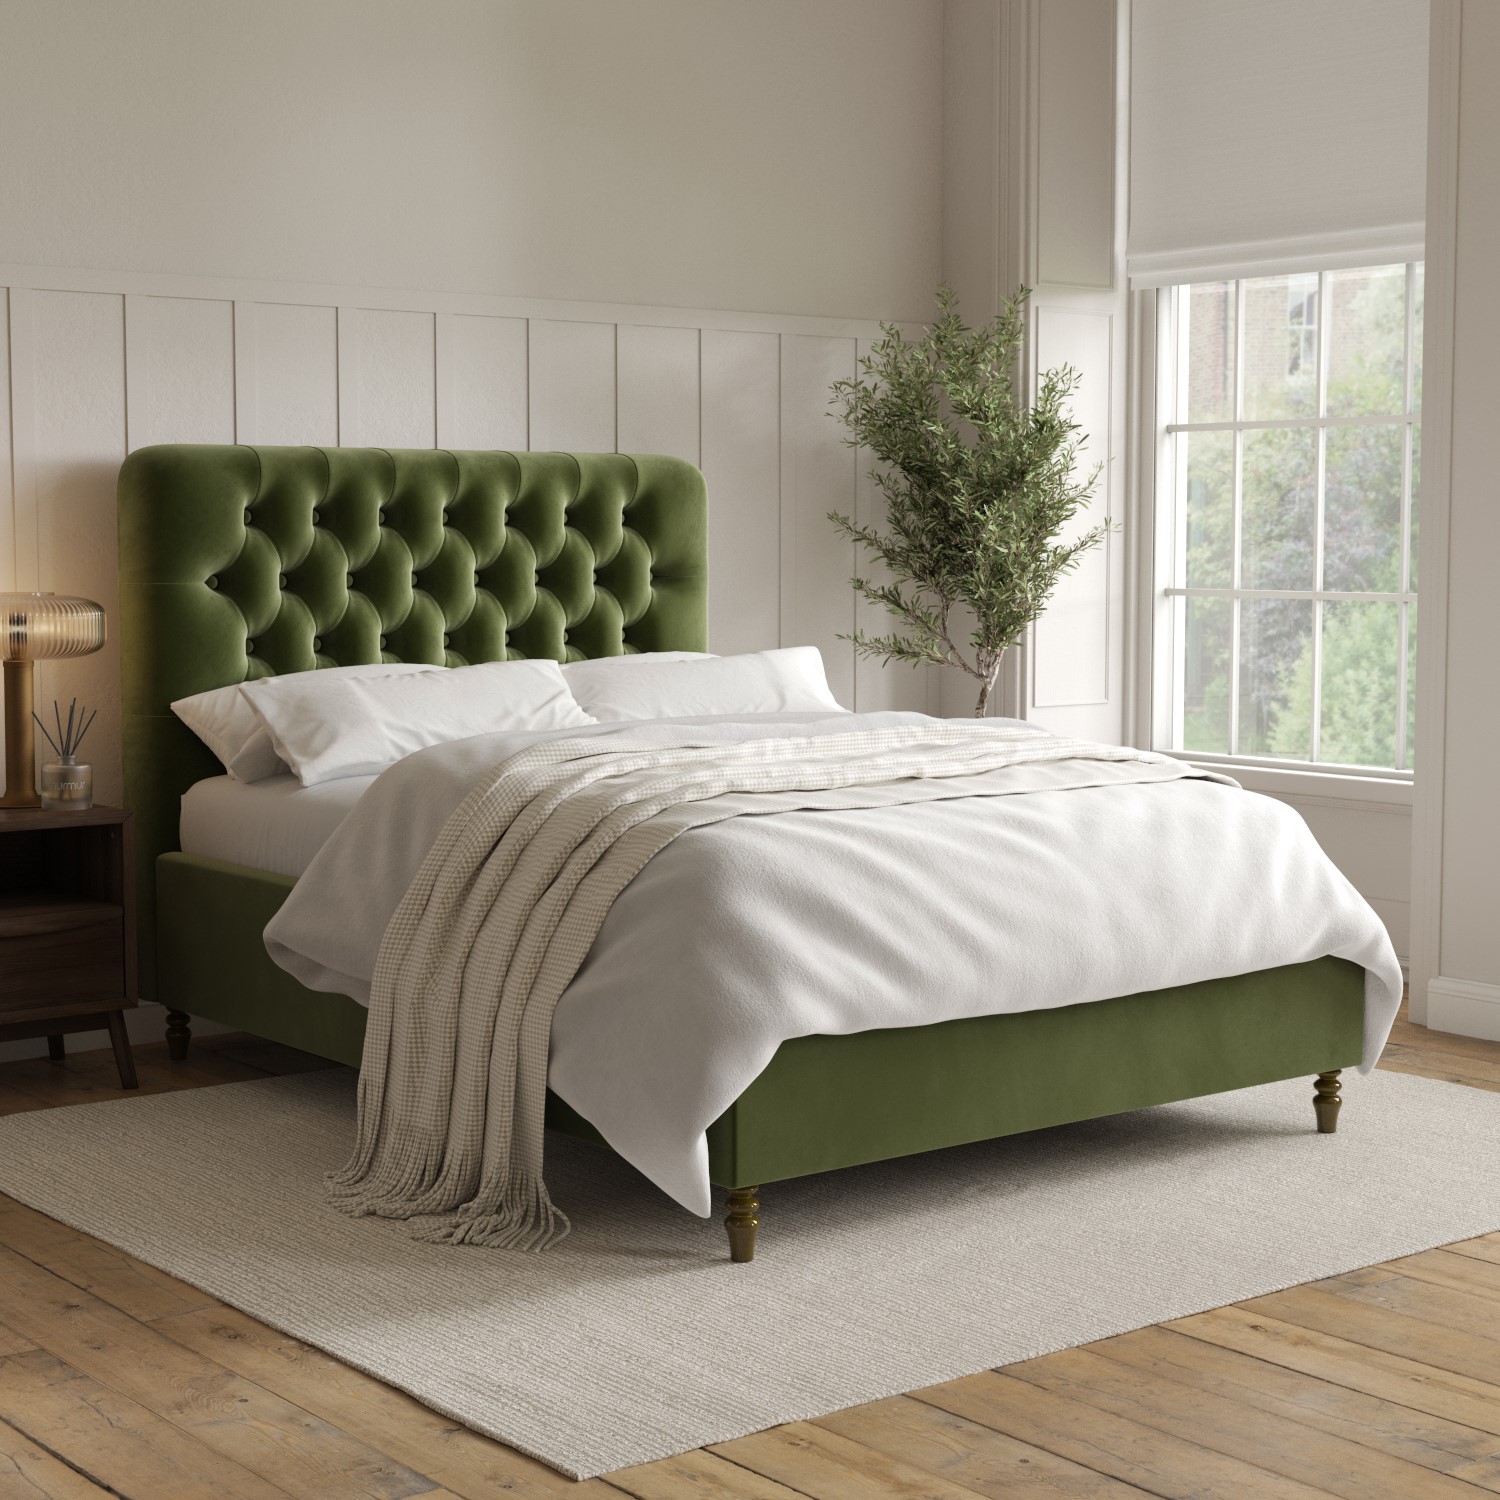 Photo of Olive green velvet double ottoman bed with legs - pippa